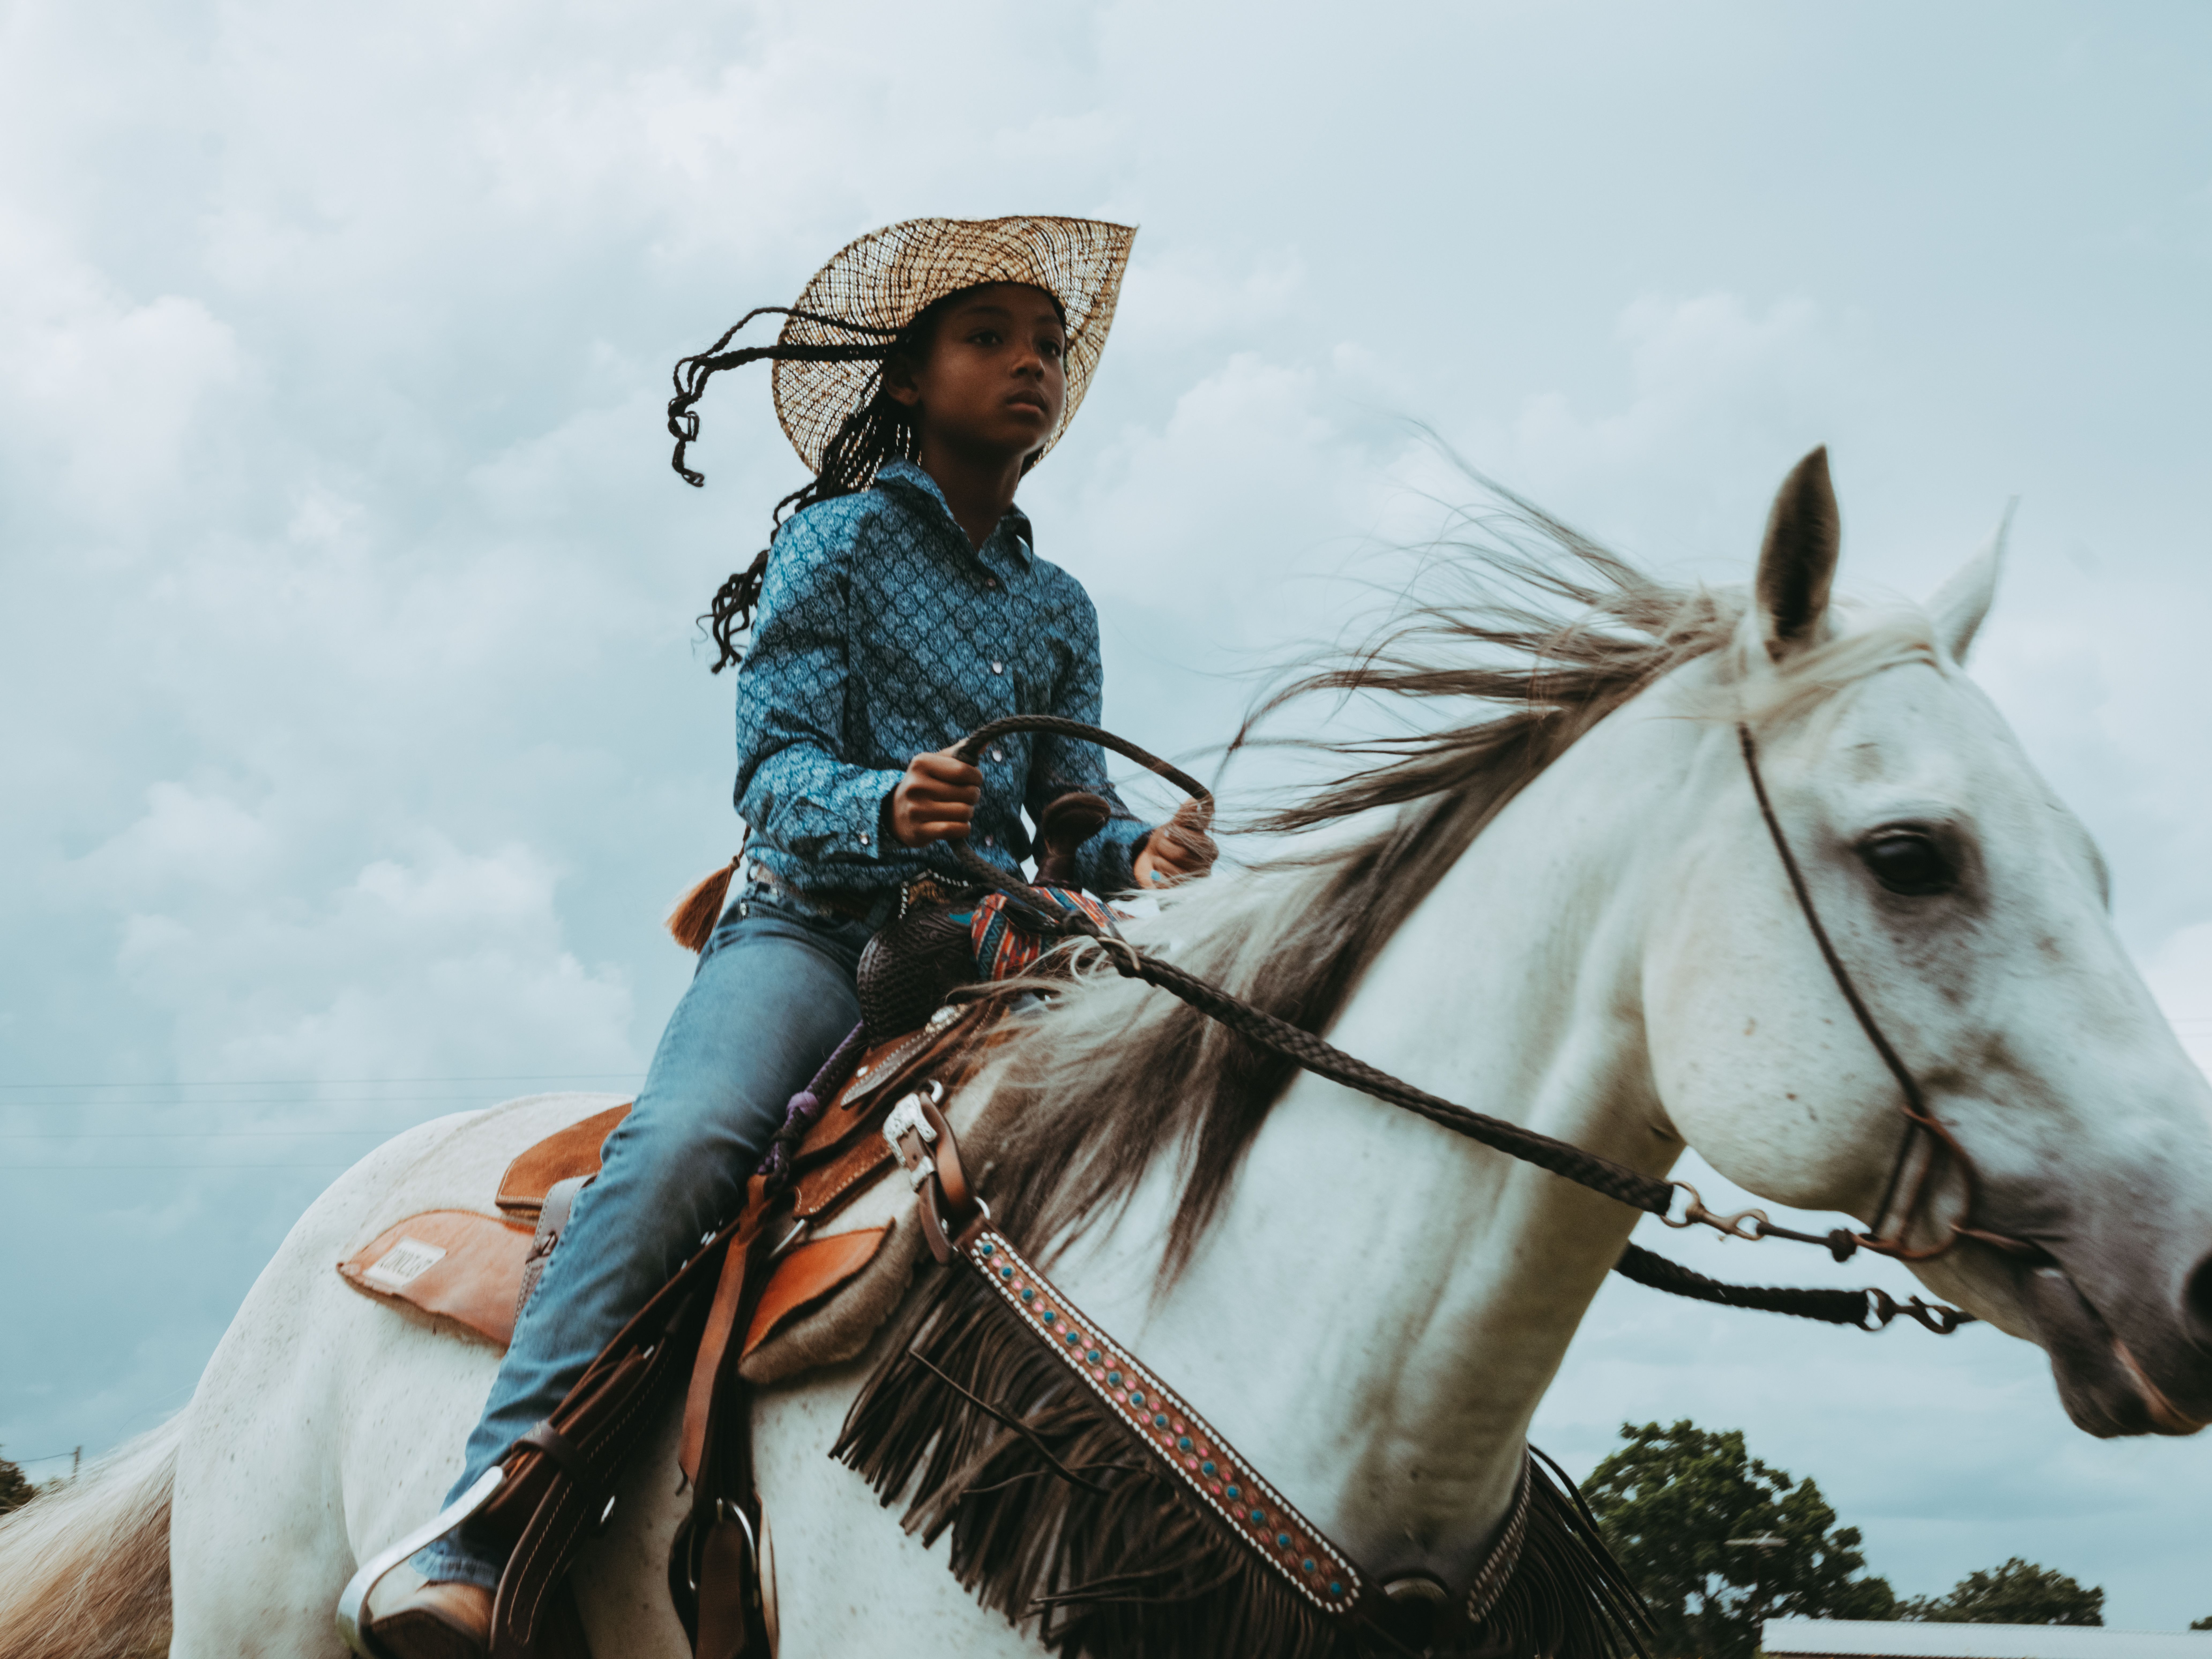 A Black cowgirl with braids rides a white horse.